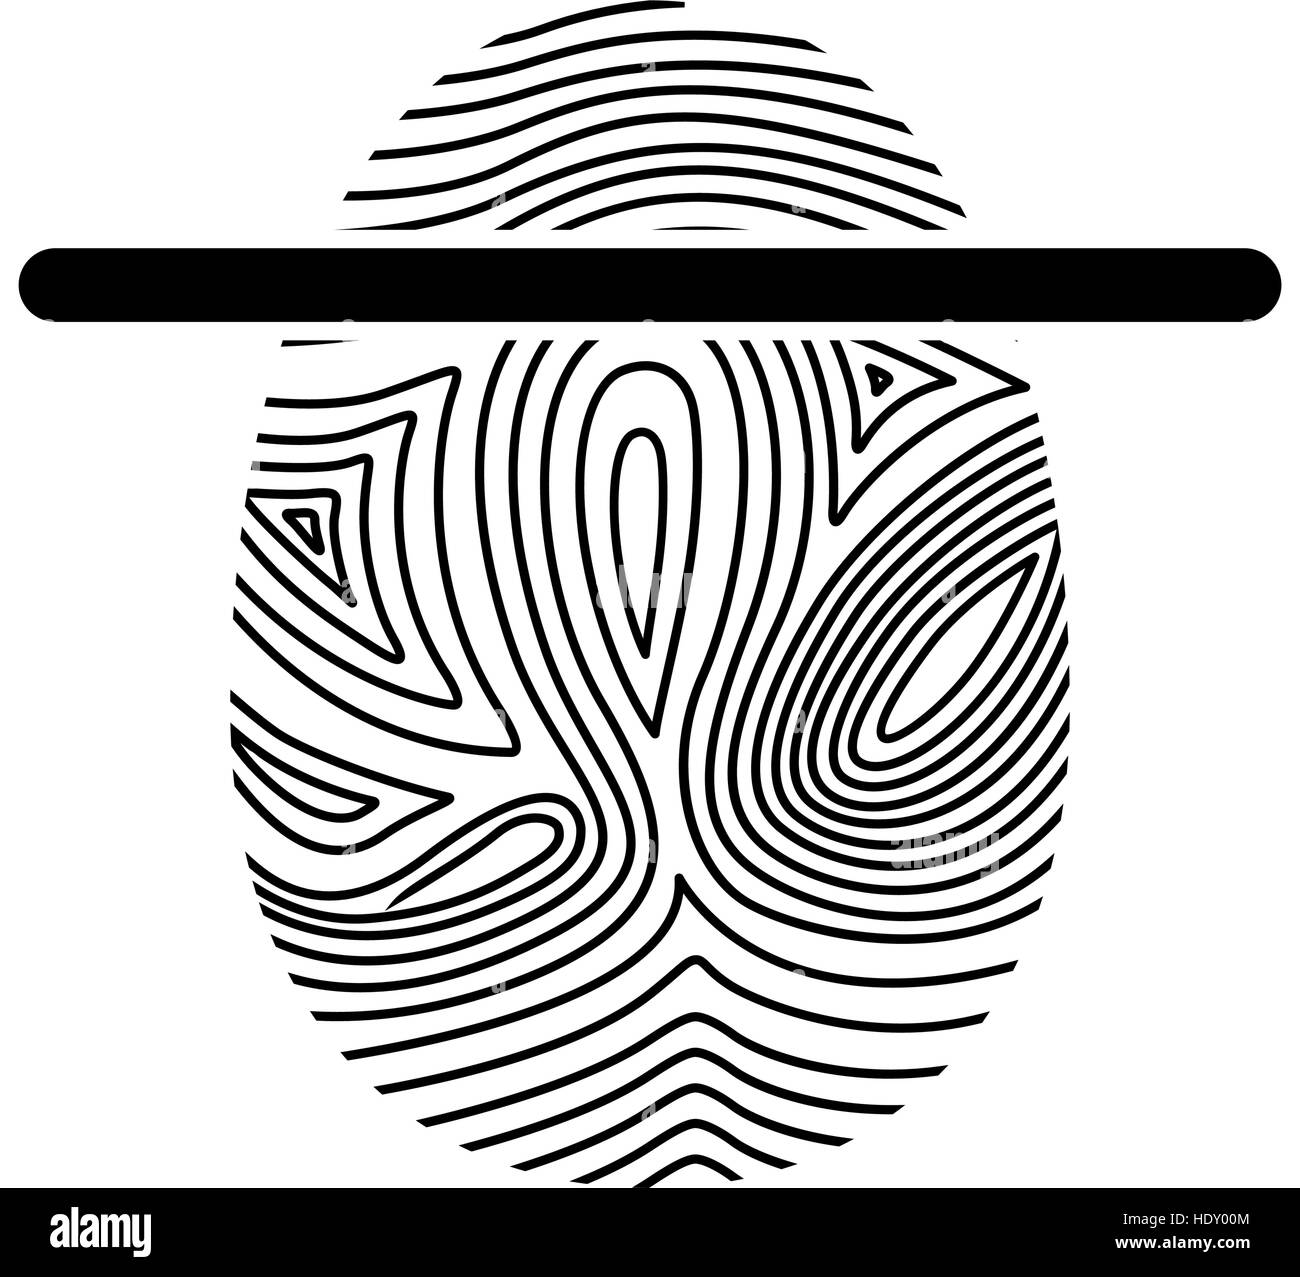 Fingerprint icon. Identity security print and privacy theme. Isolated design. Vector illustration Stock Vector